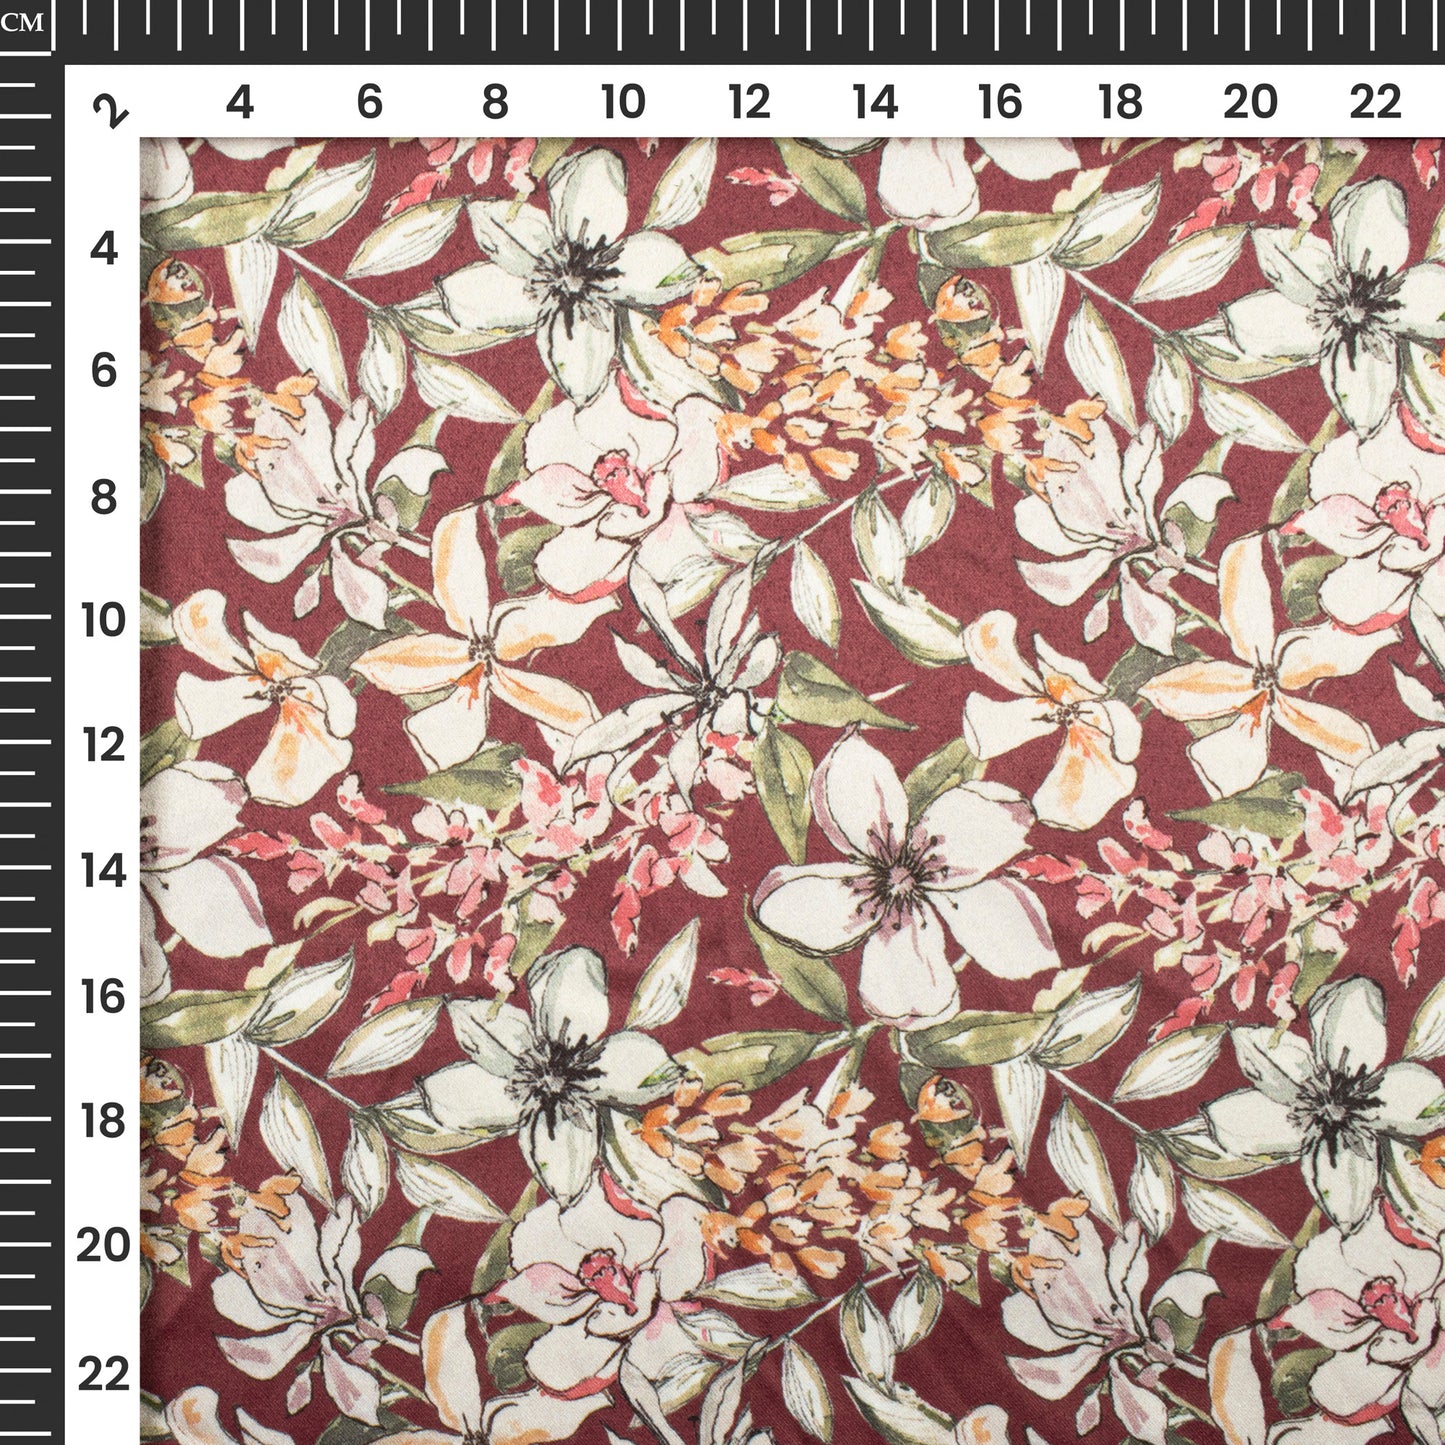 Burgundy Red Floral Digital Print Charmeuse Satin Fabric (Width 58 Inches)